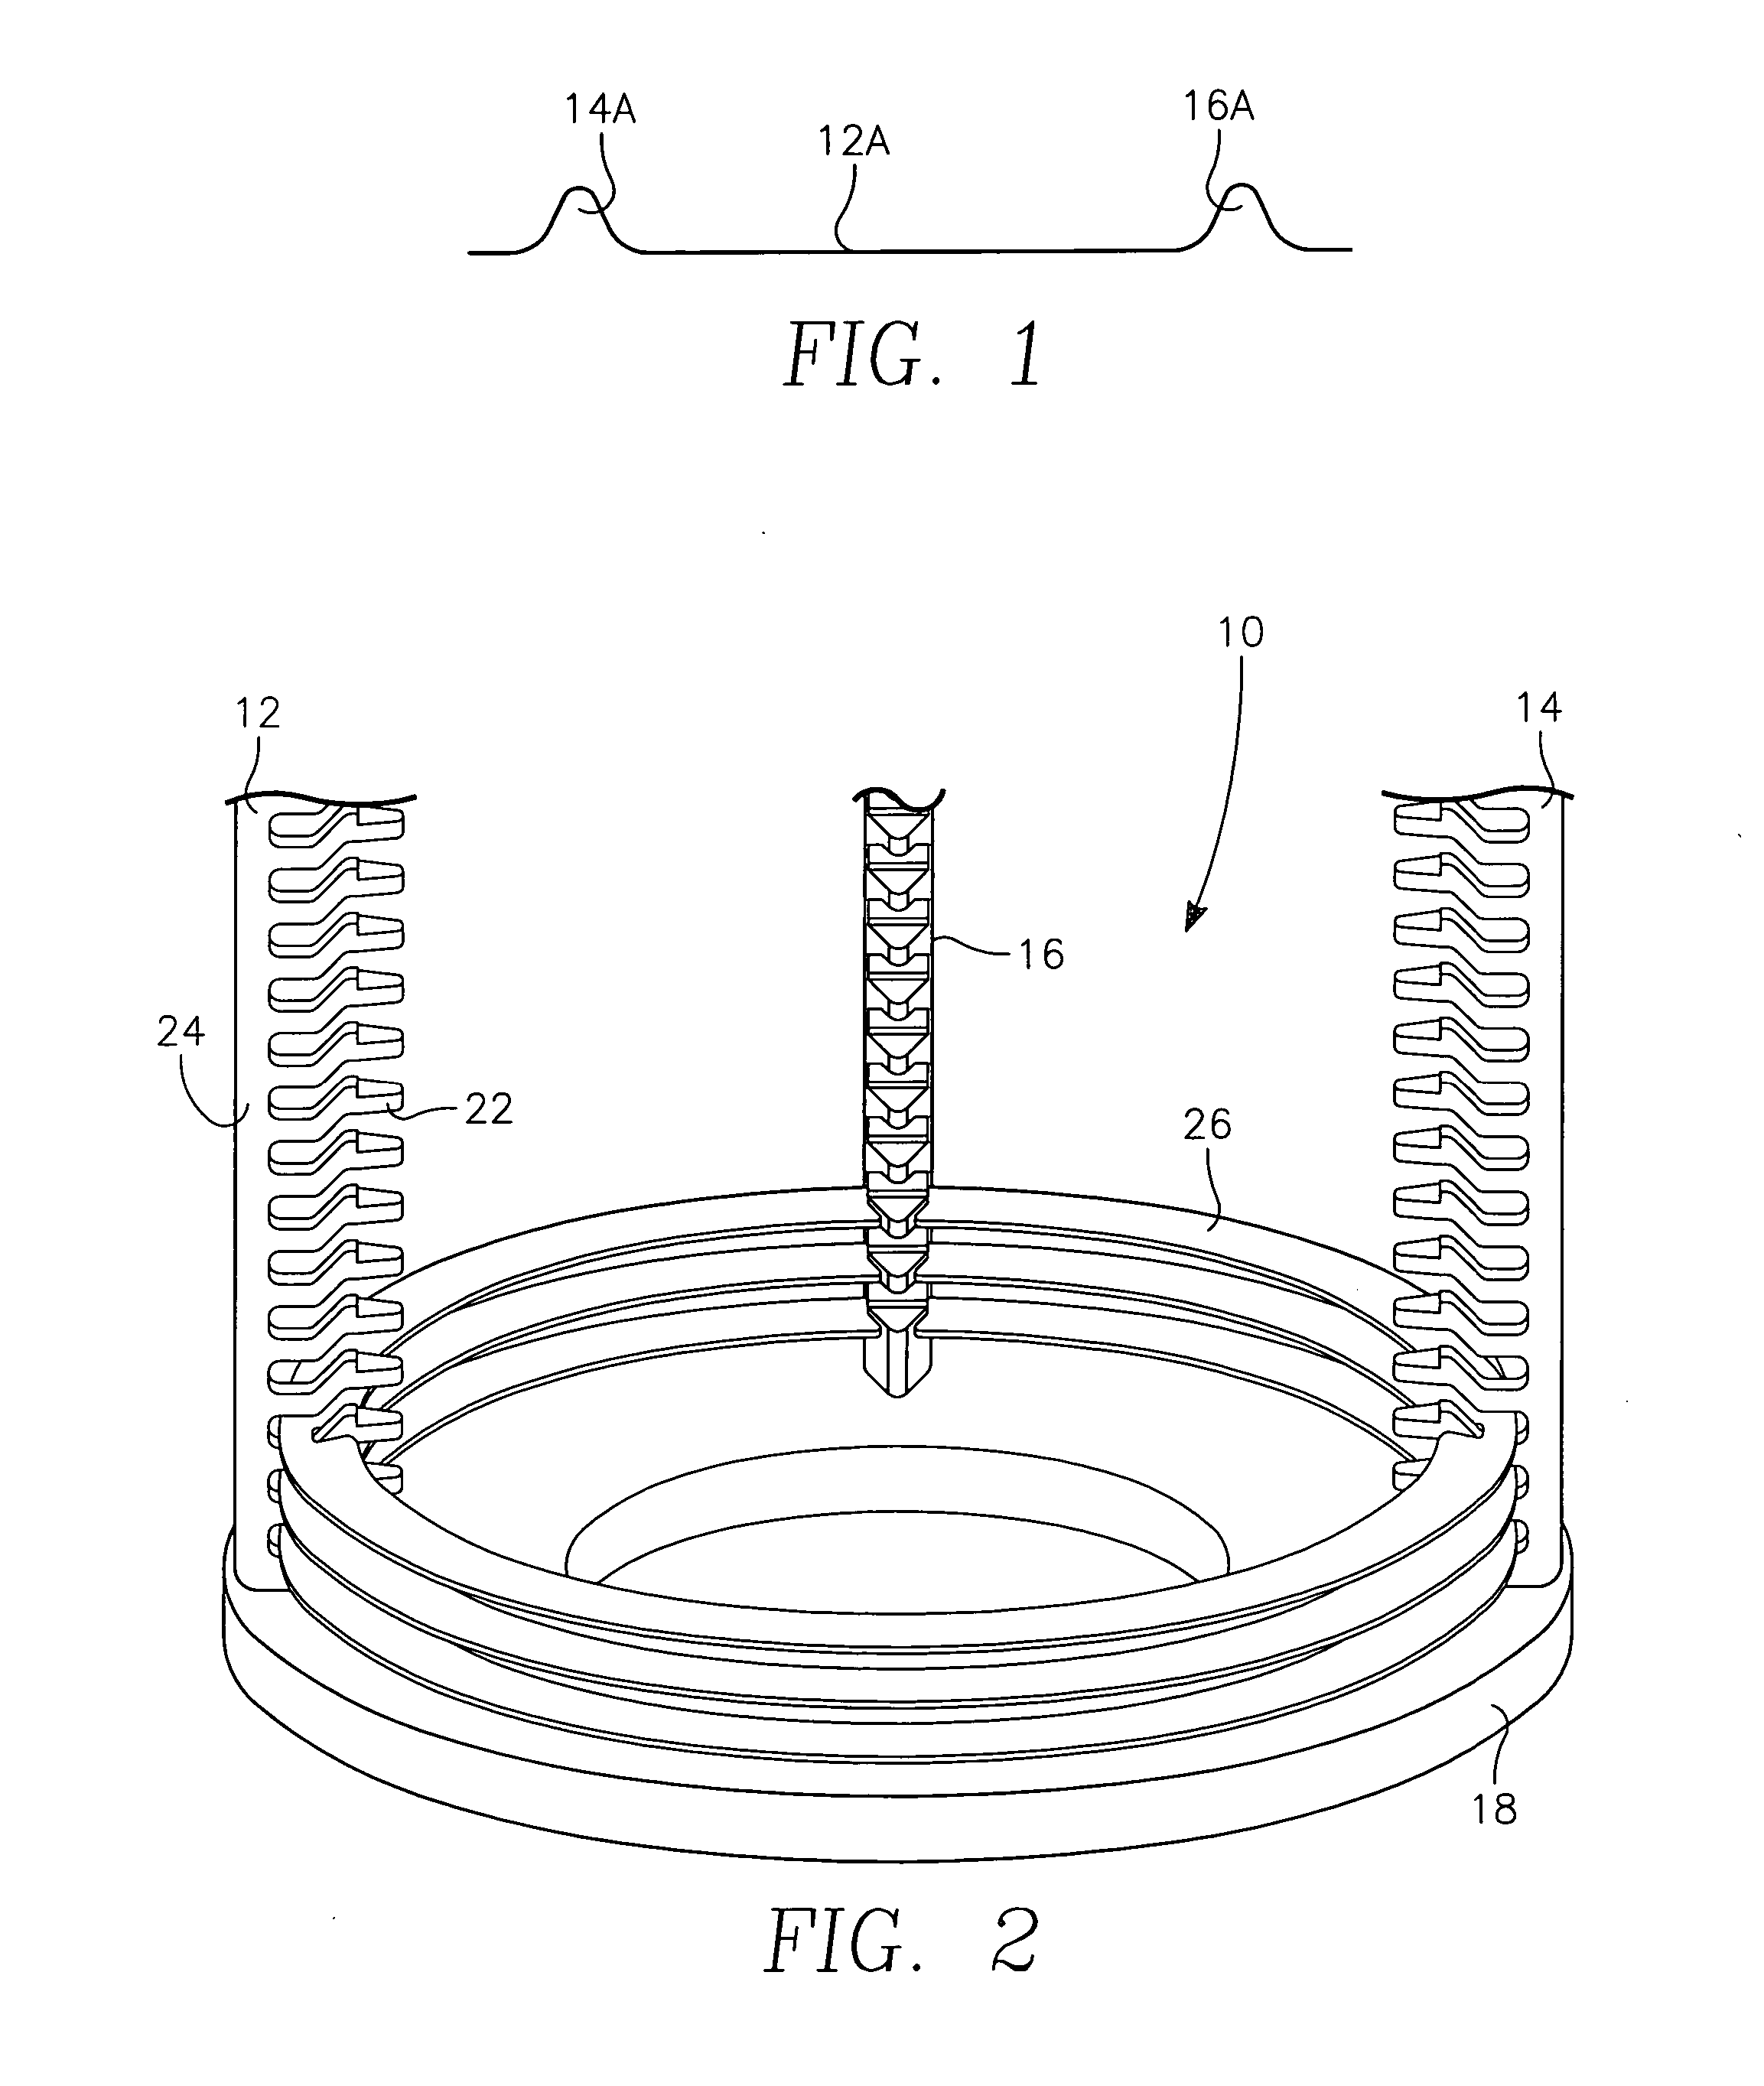 Detachable edge ring for thermal processing support towers